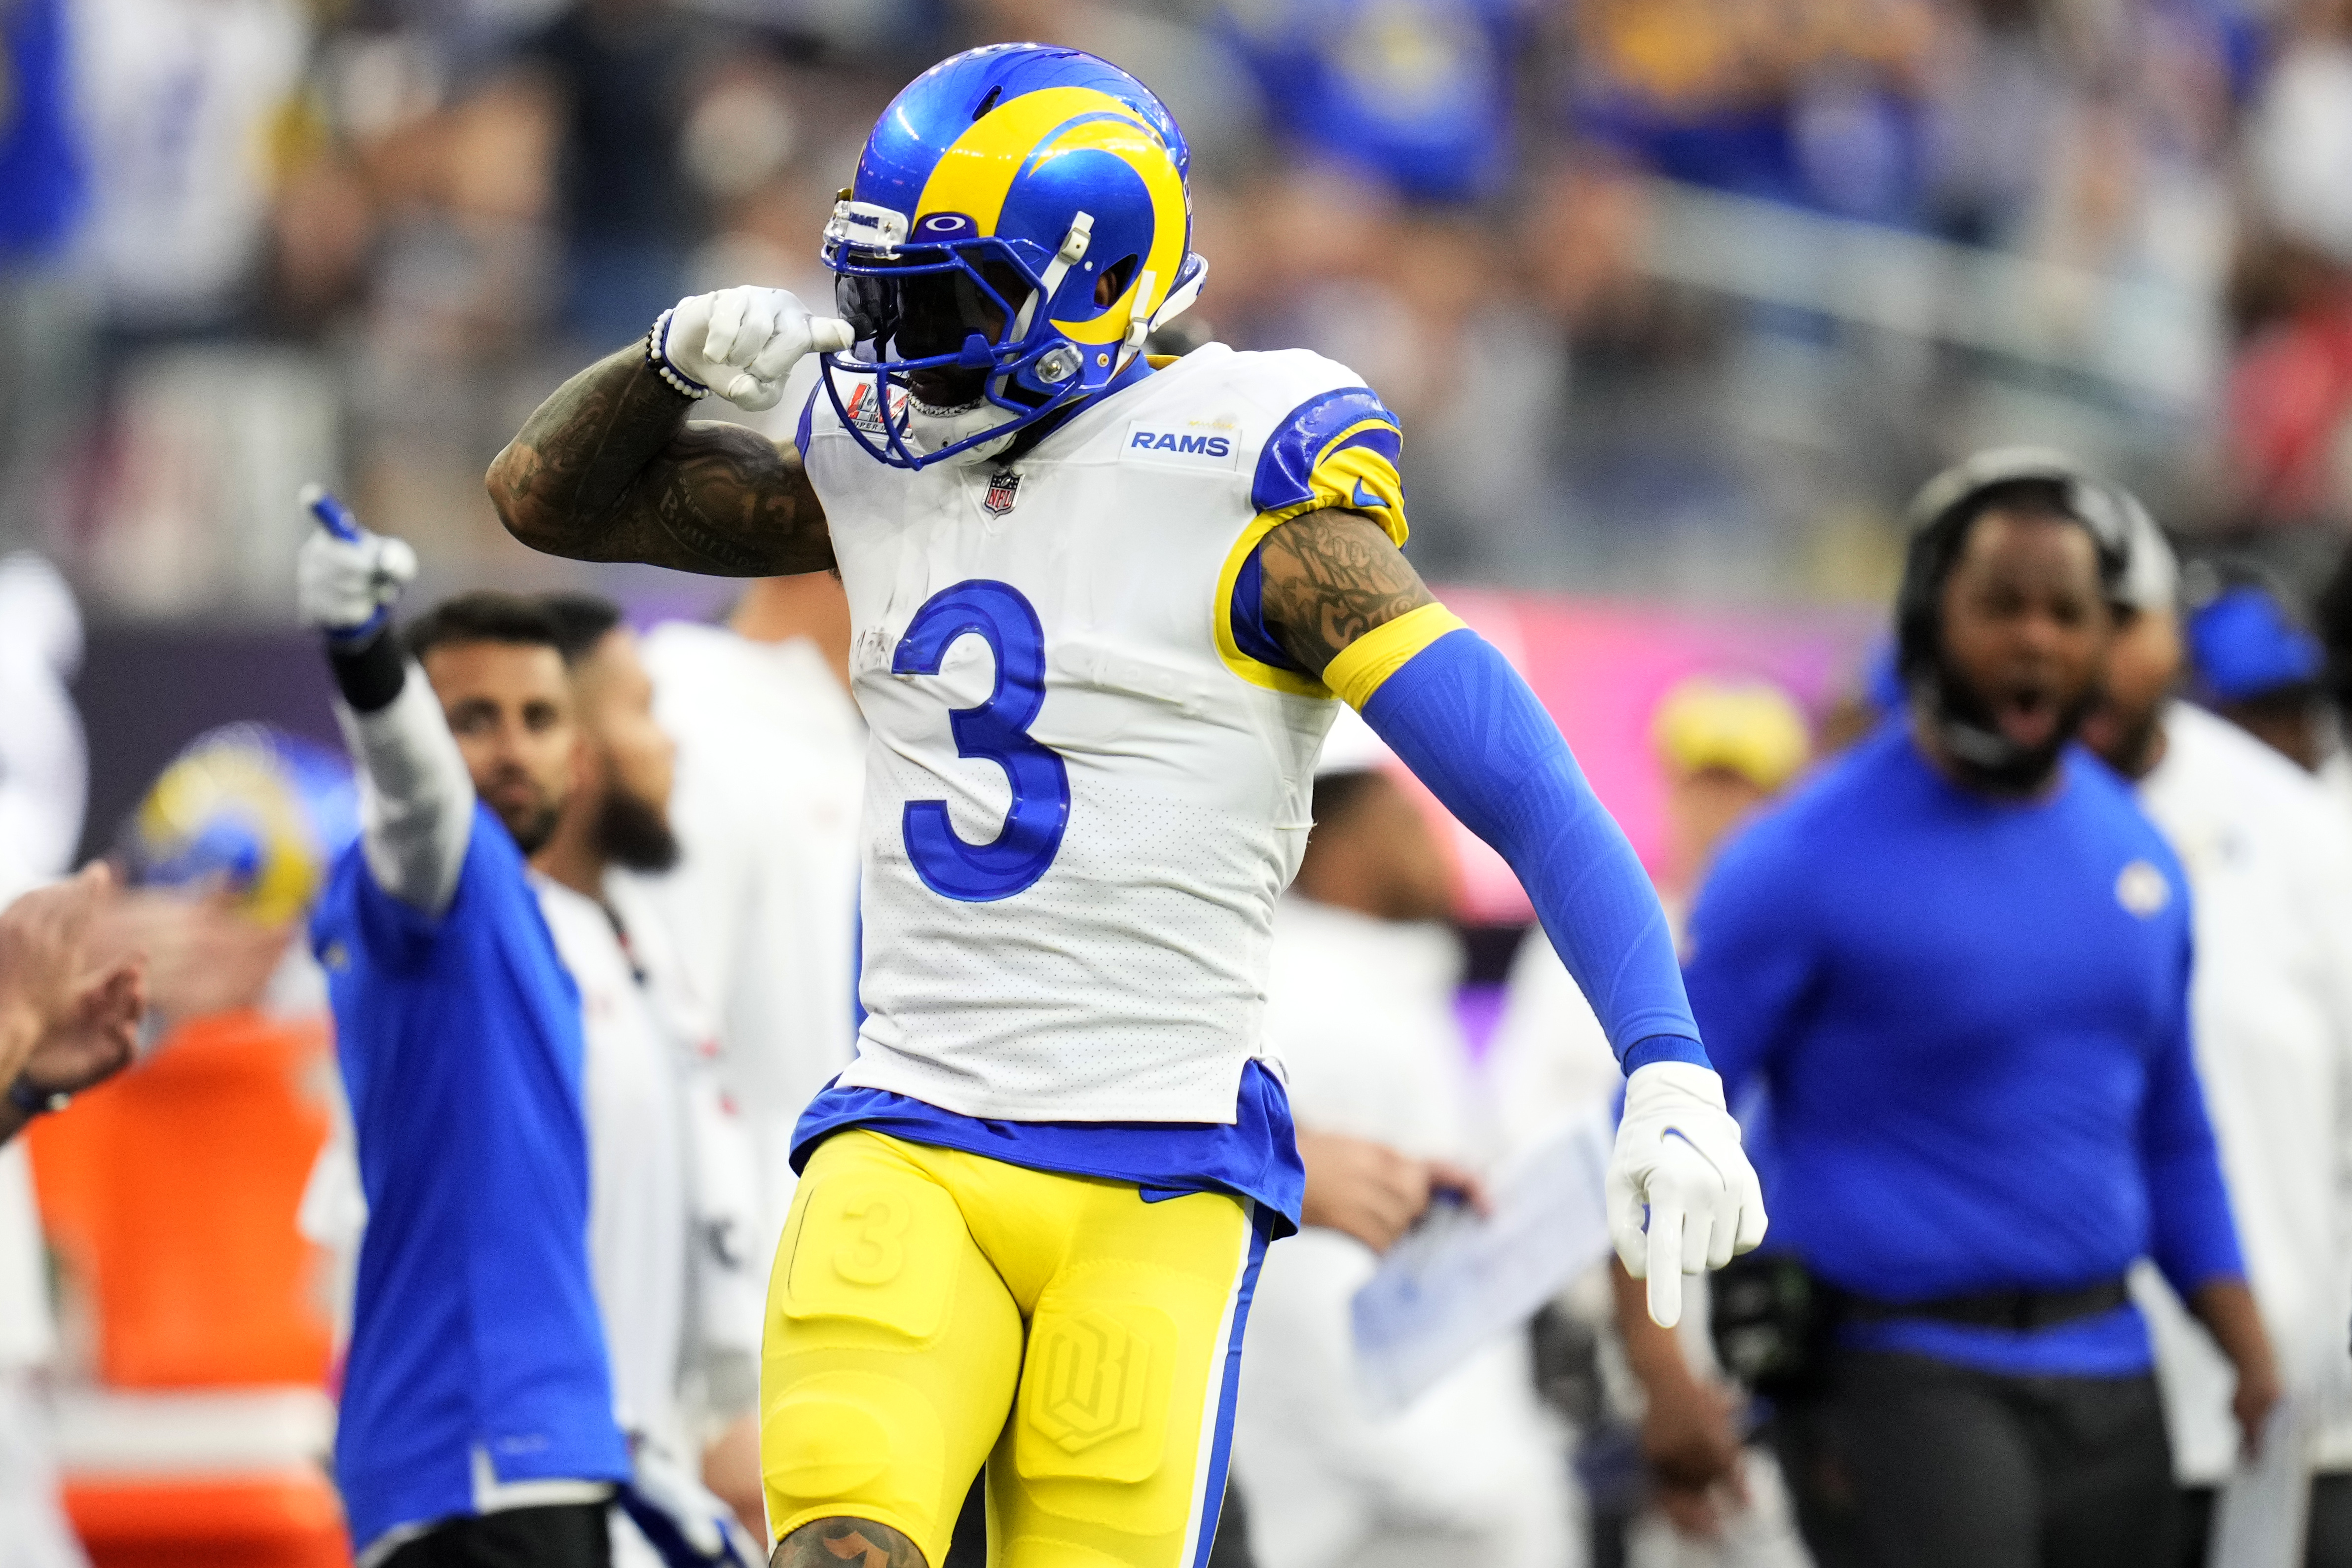 Former Browns WR Odell Beckham Jr. reacts after catching pass for the Rams in the Super Bowl